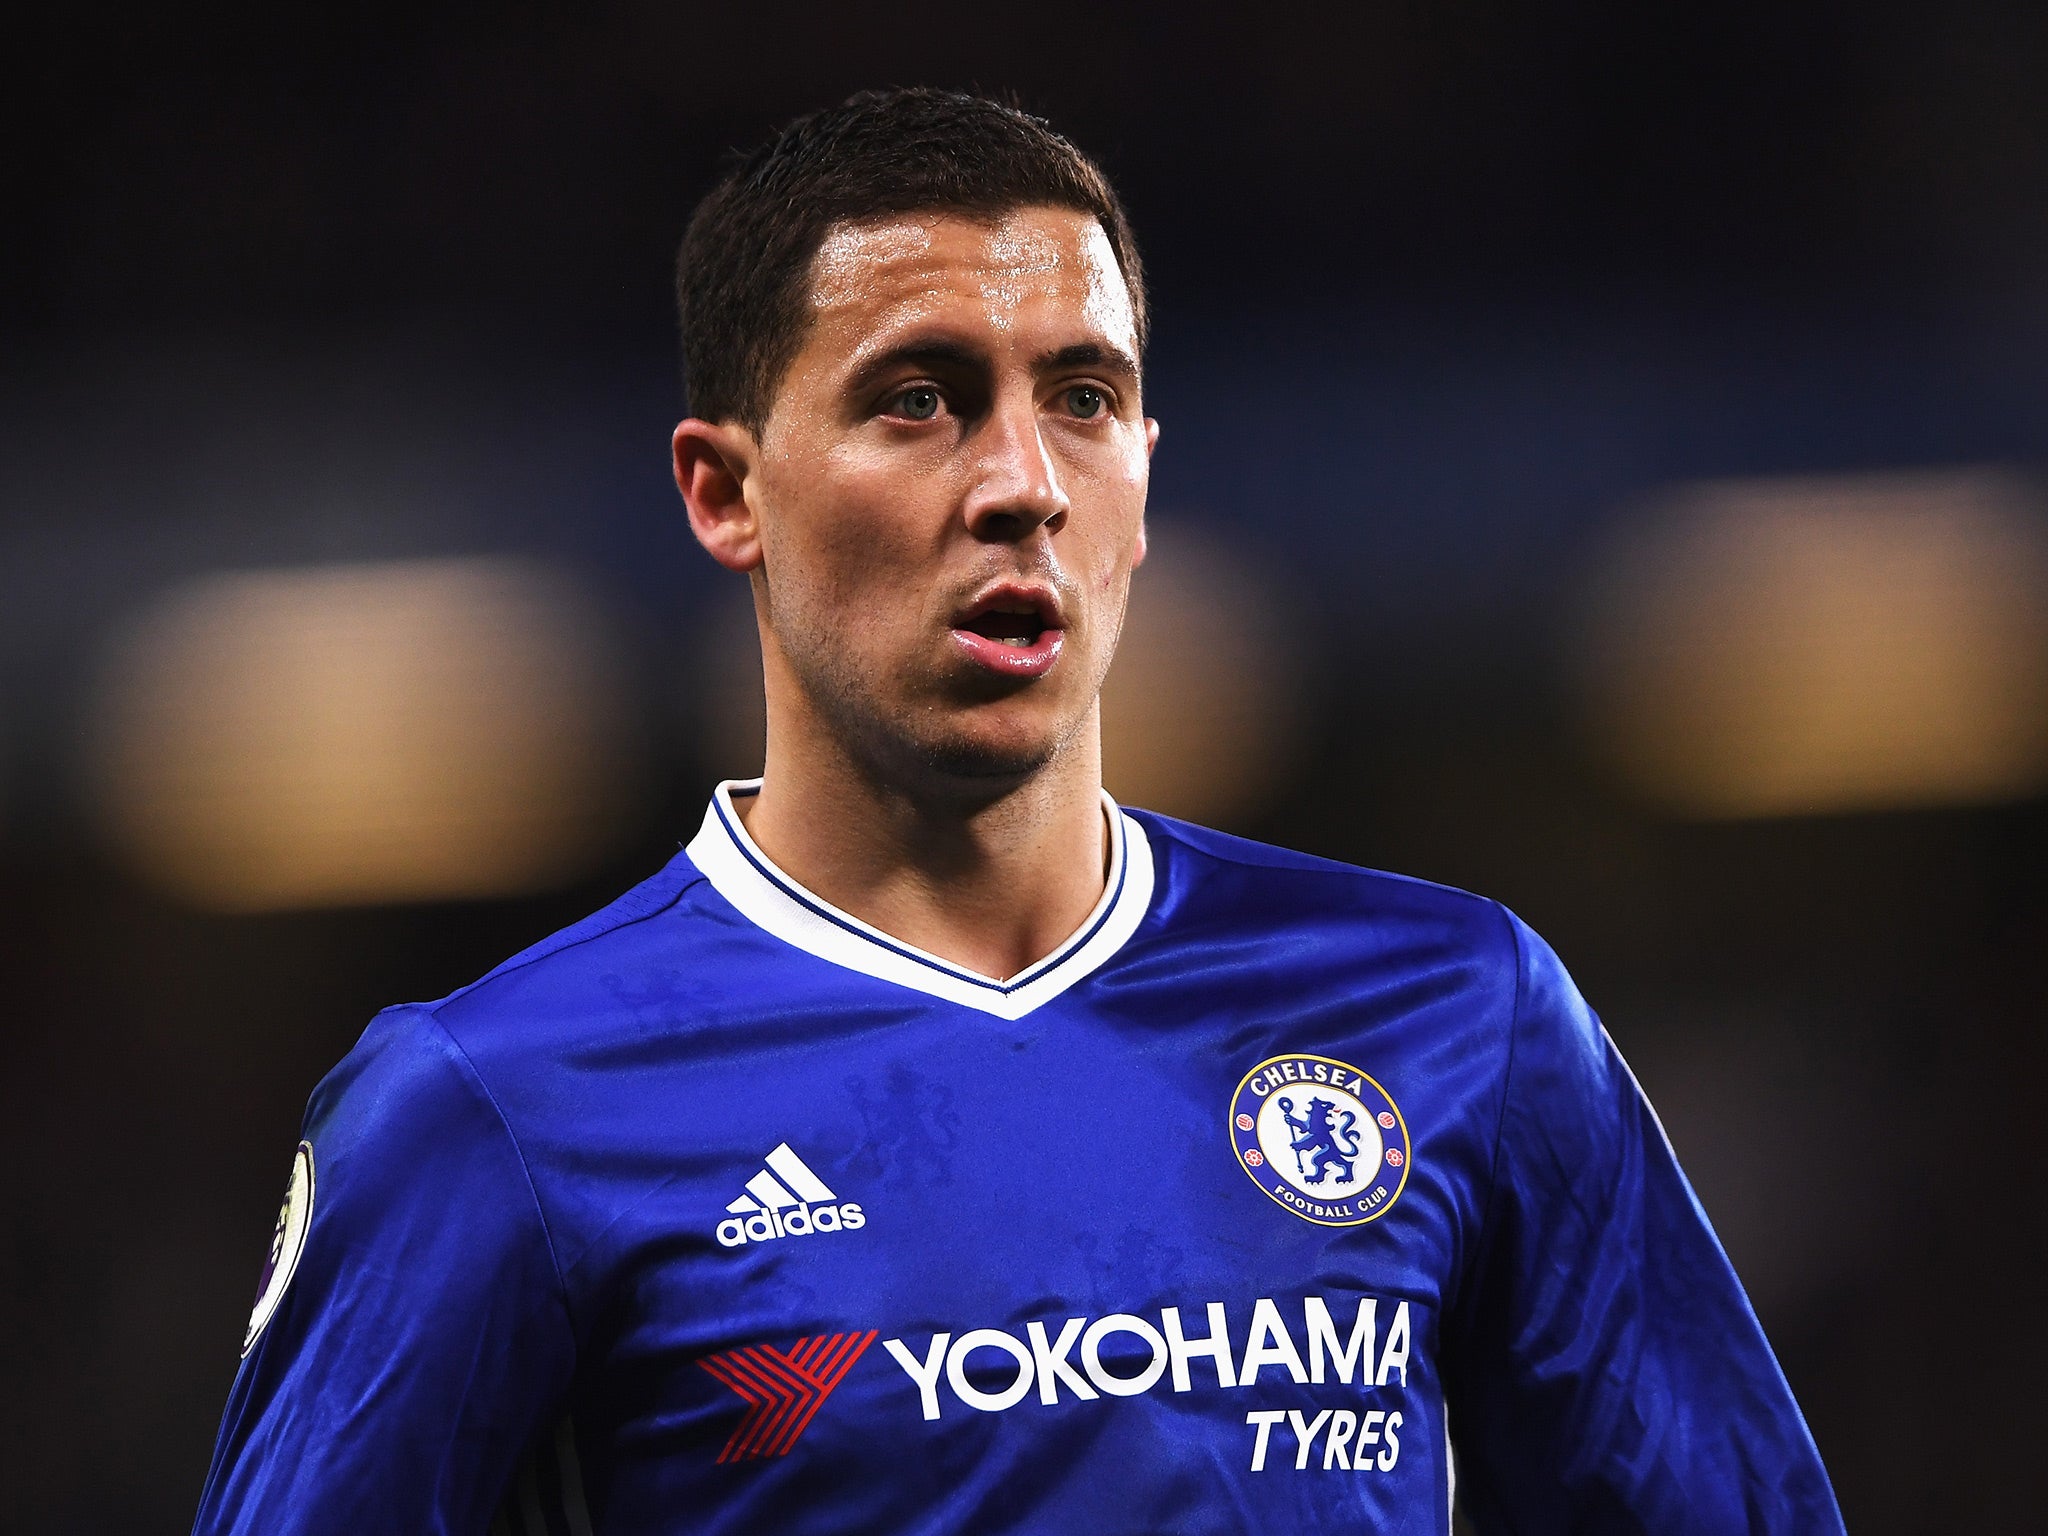 Eden Hazard is likely to win one or both of this season's player of the year awards